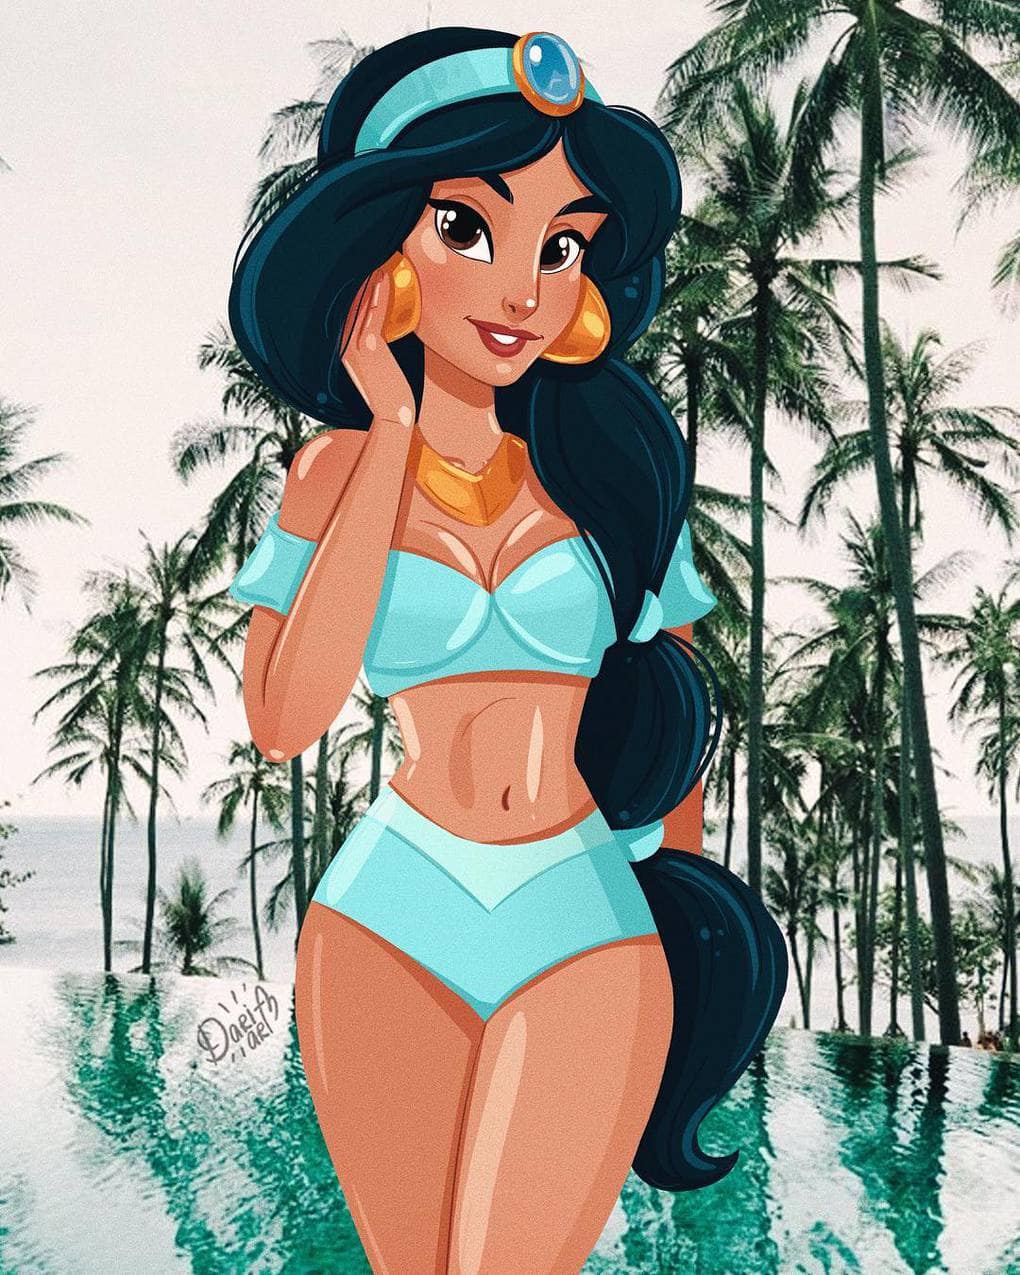 Disney Princess in swimsuits with real backgrounds 